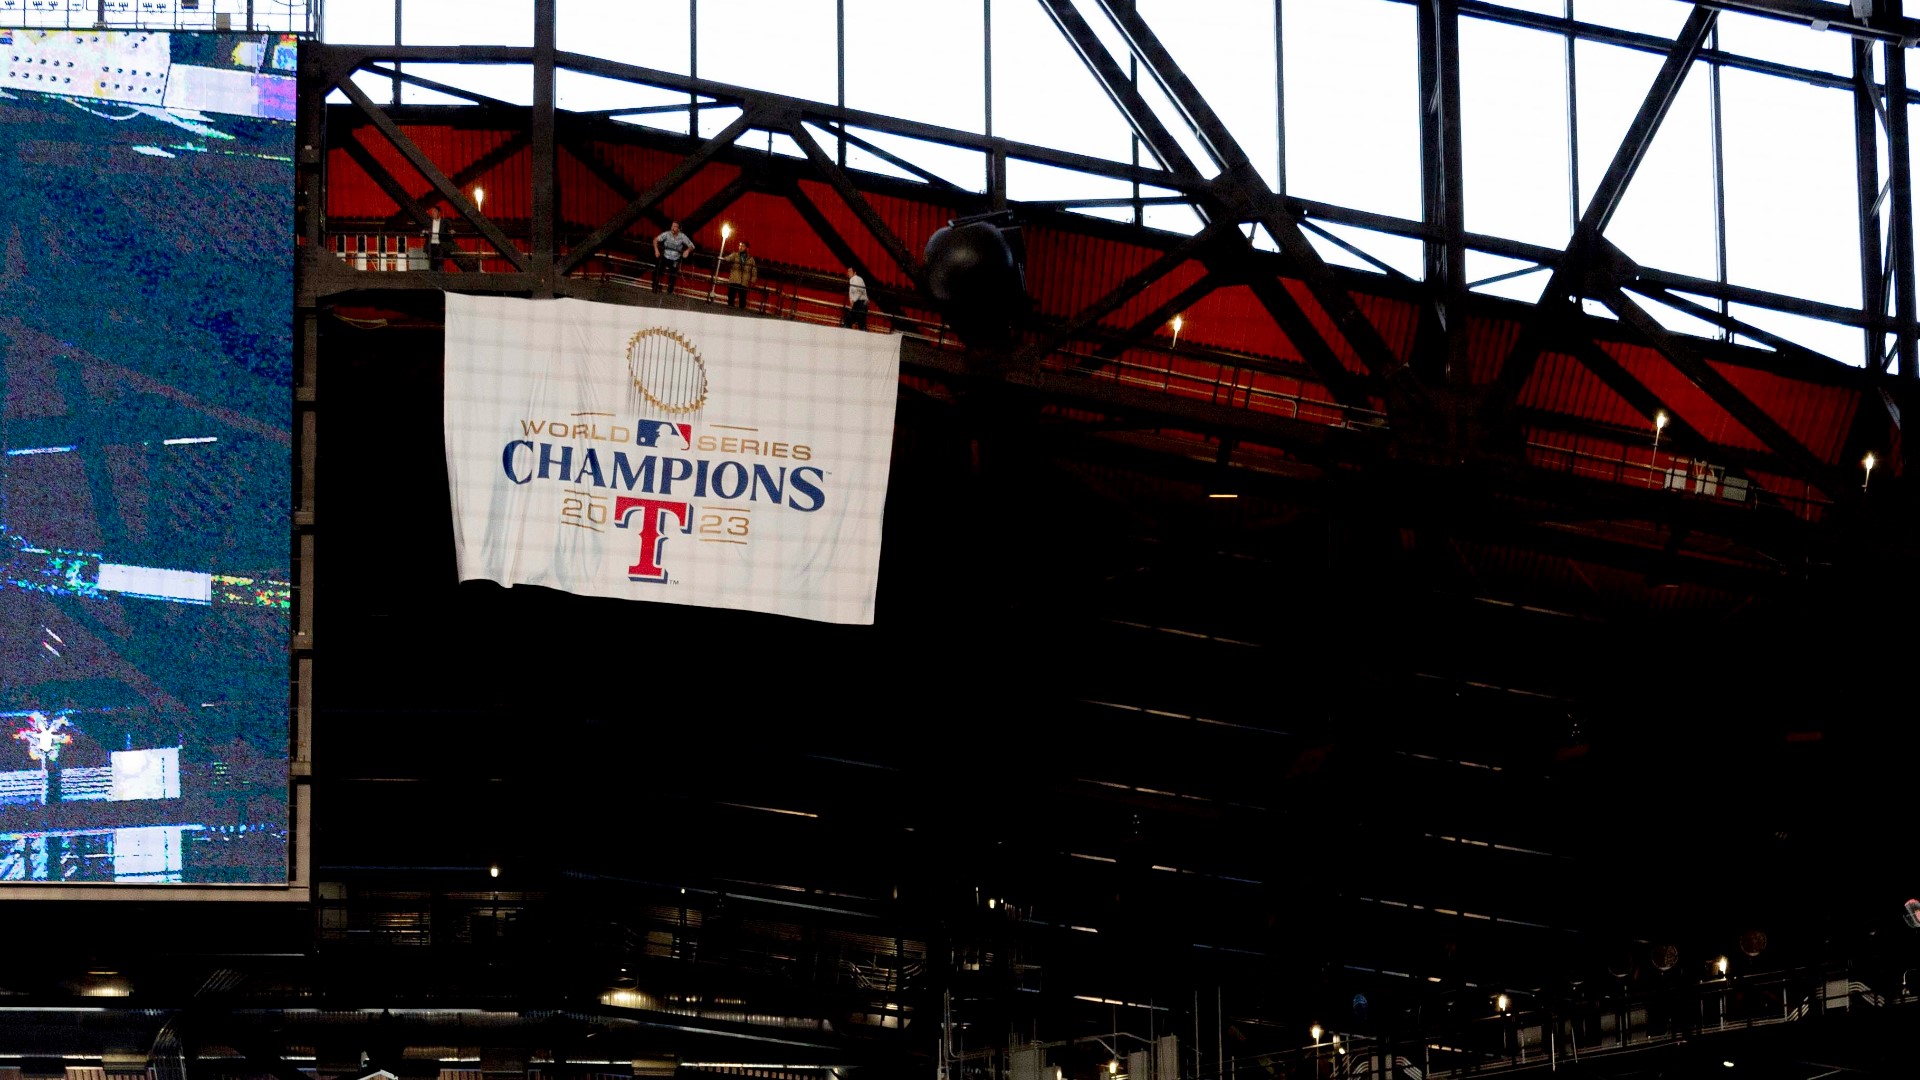 The team unveiled its first championship banner in a pregame ceremony Thursday night ahead of the Rangers' Opening Day matchup against the Chicago Cubs.